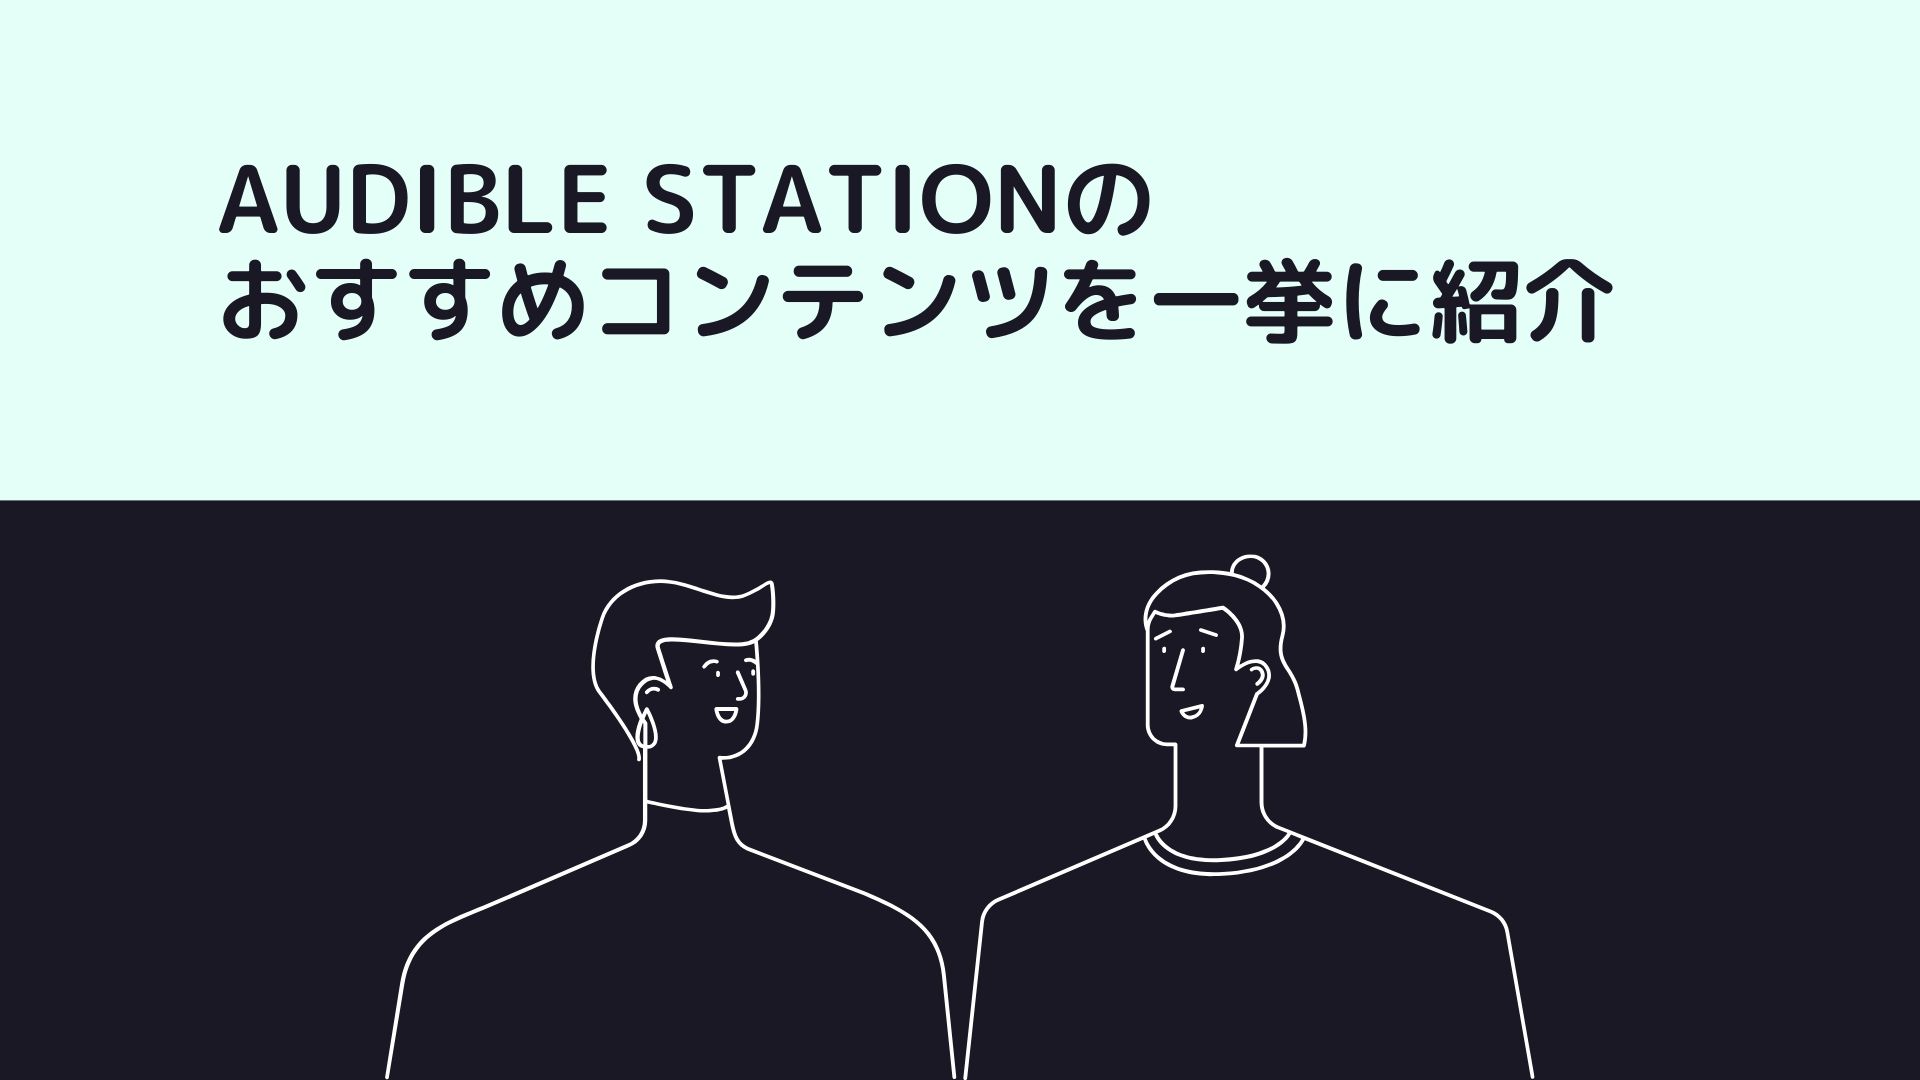 Audible Station